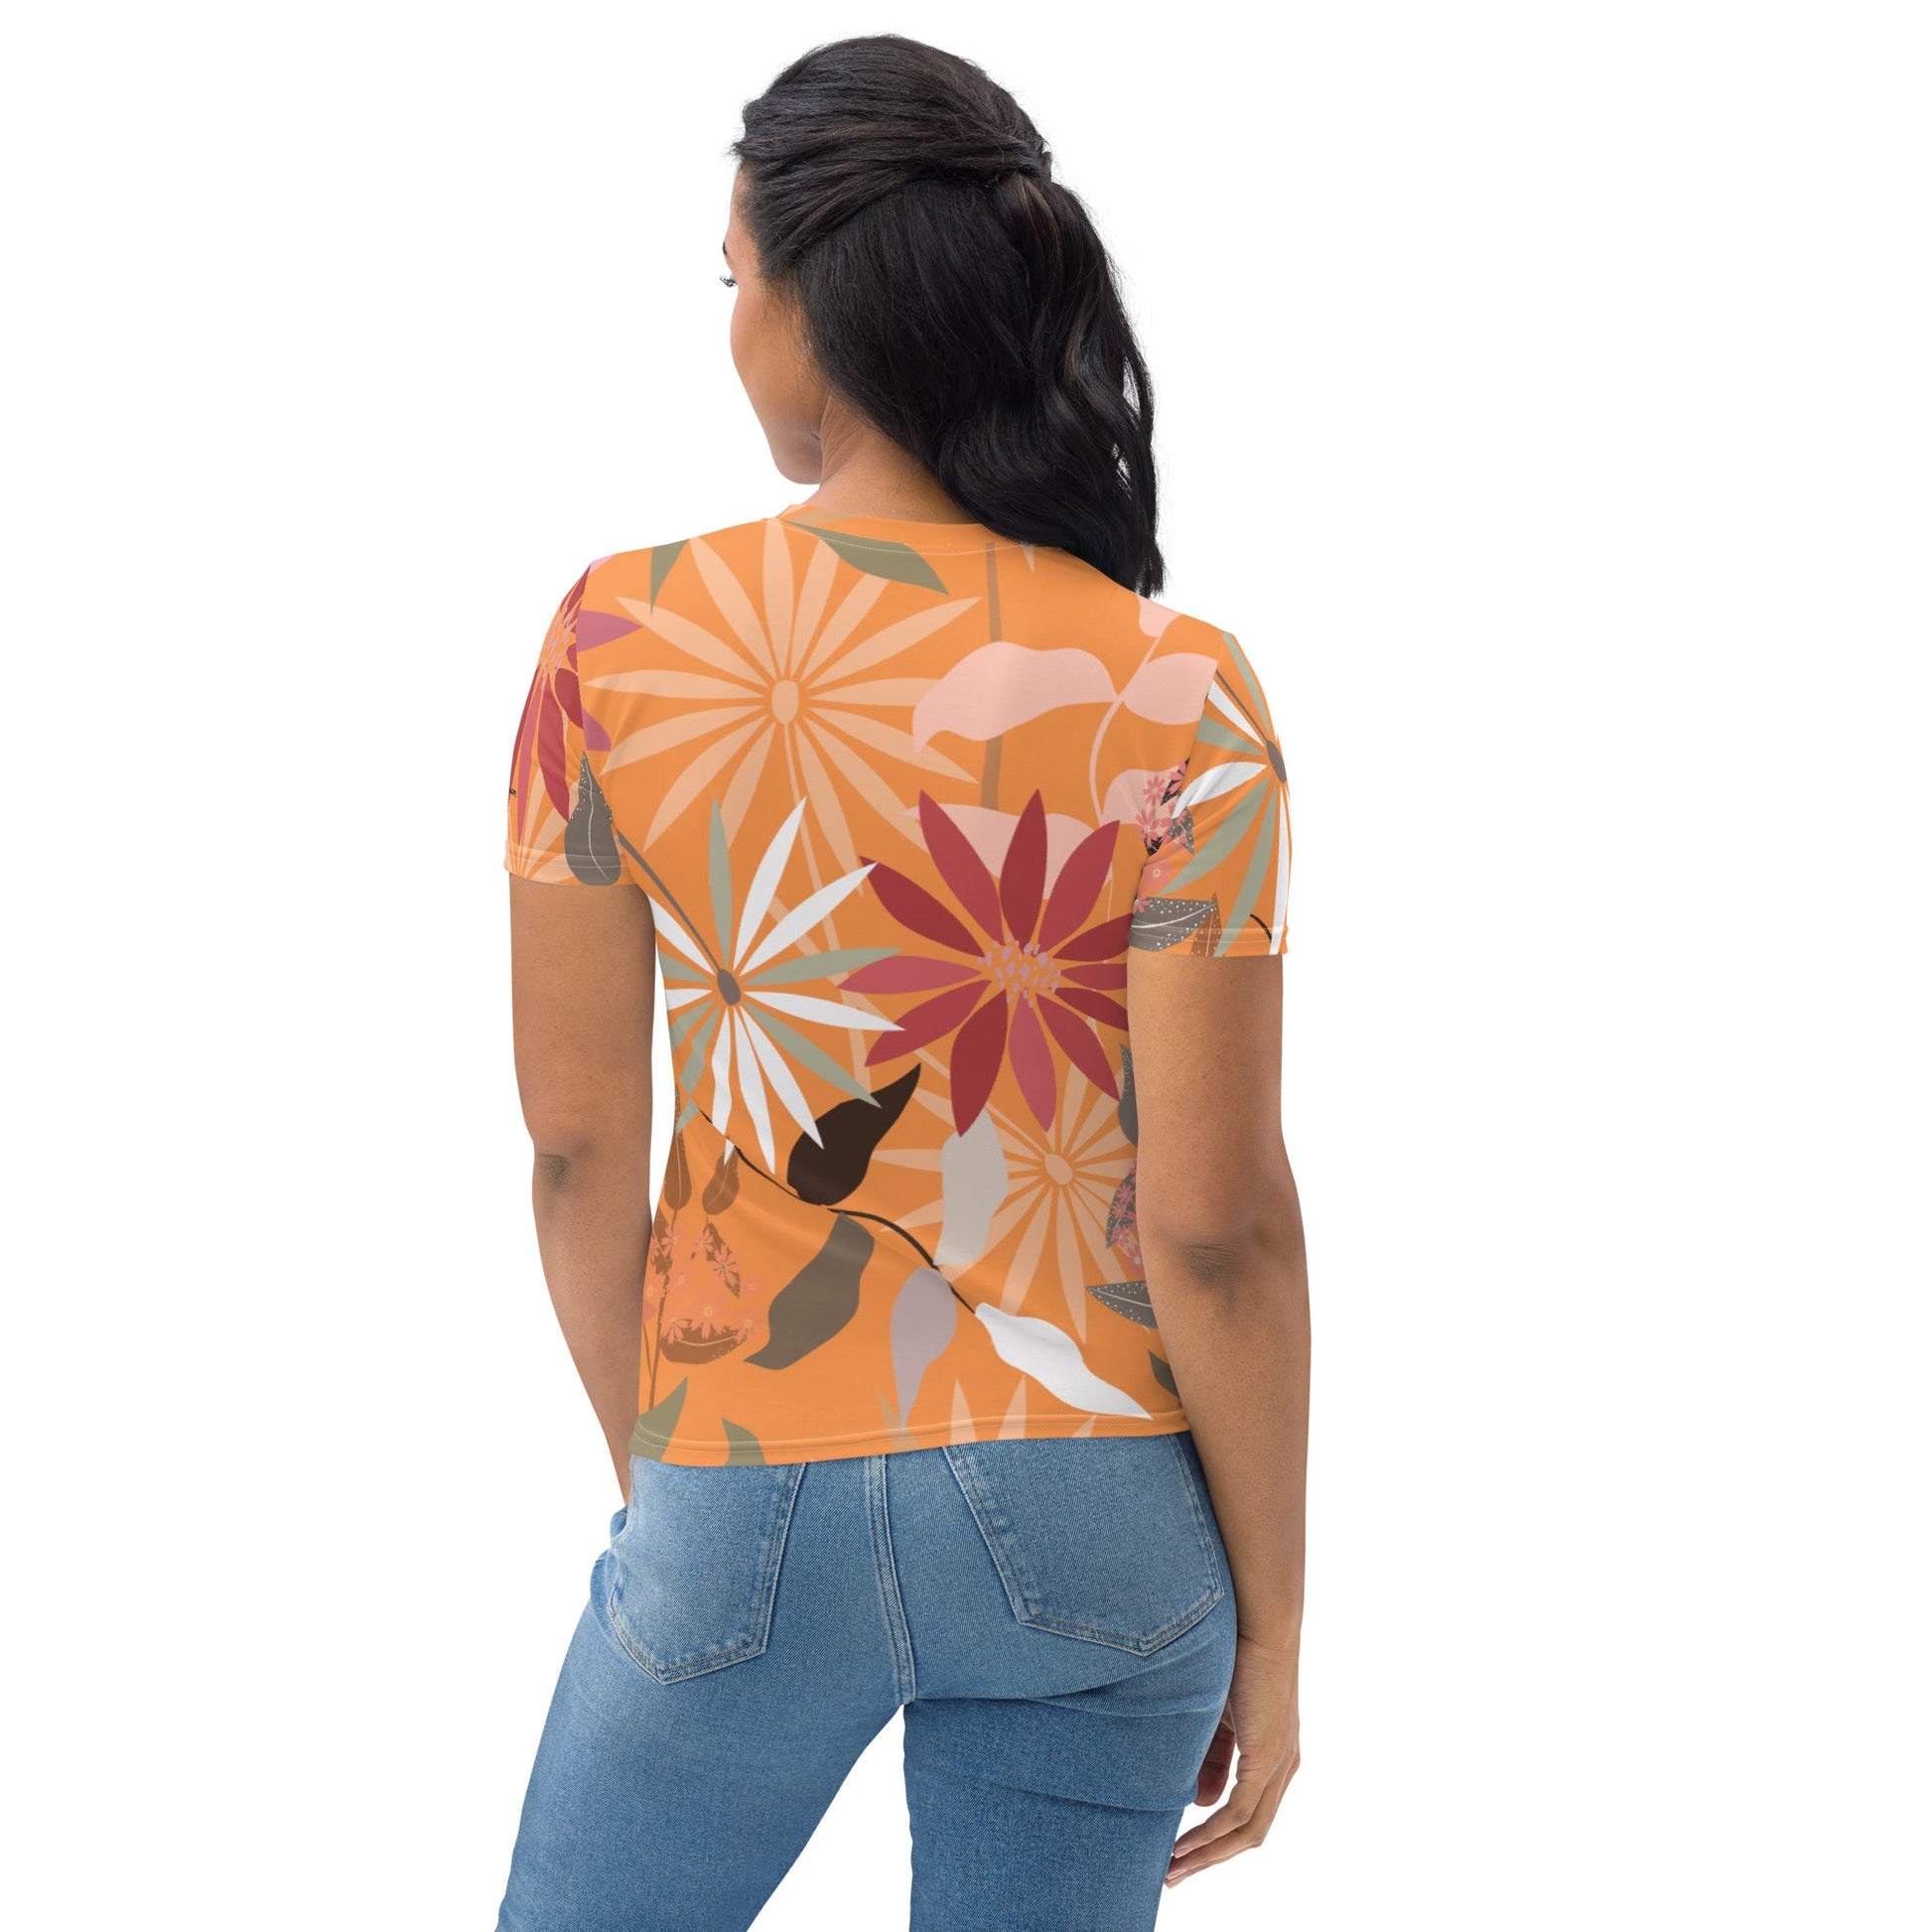 abstract-floral-all-over-print-womens-tshirt-hawaii-style